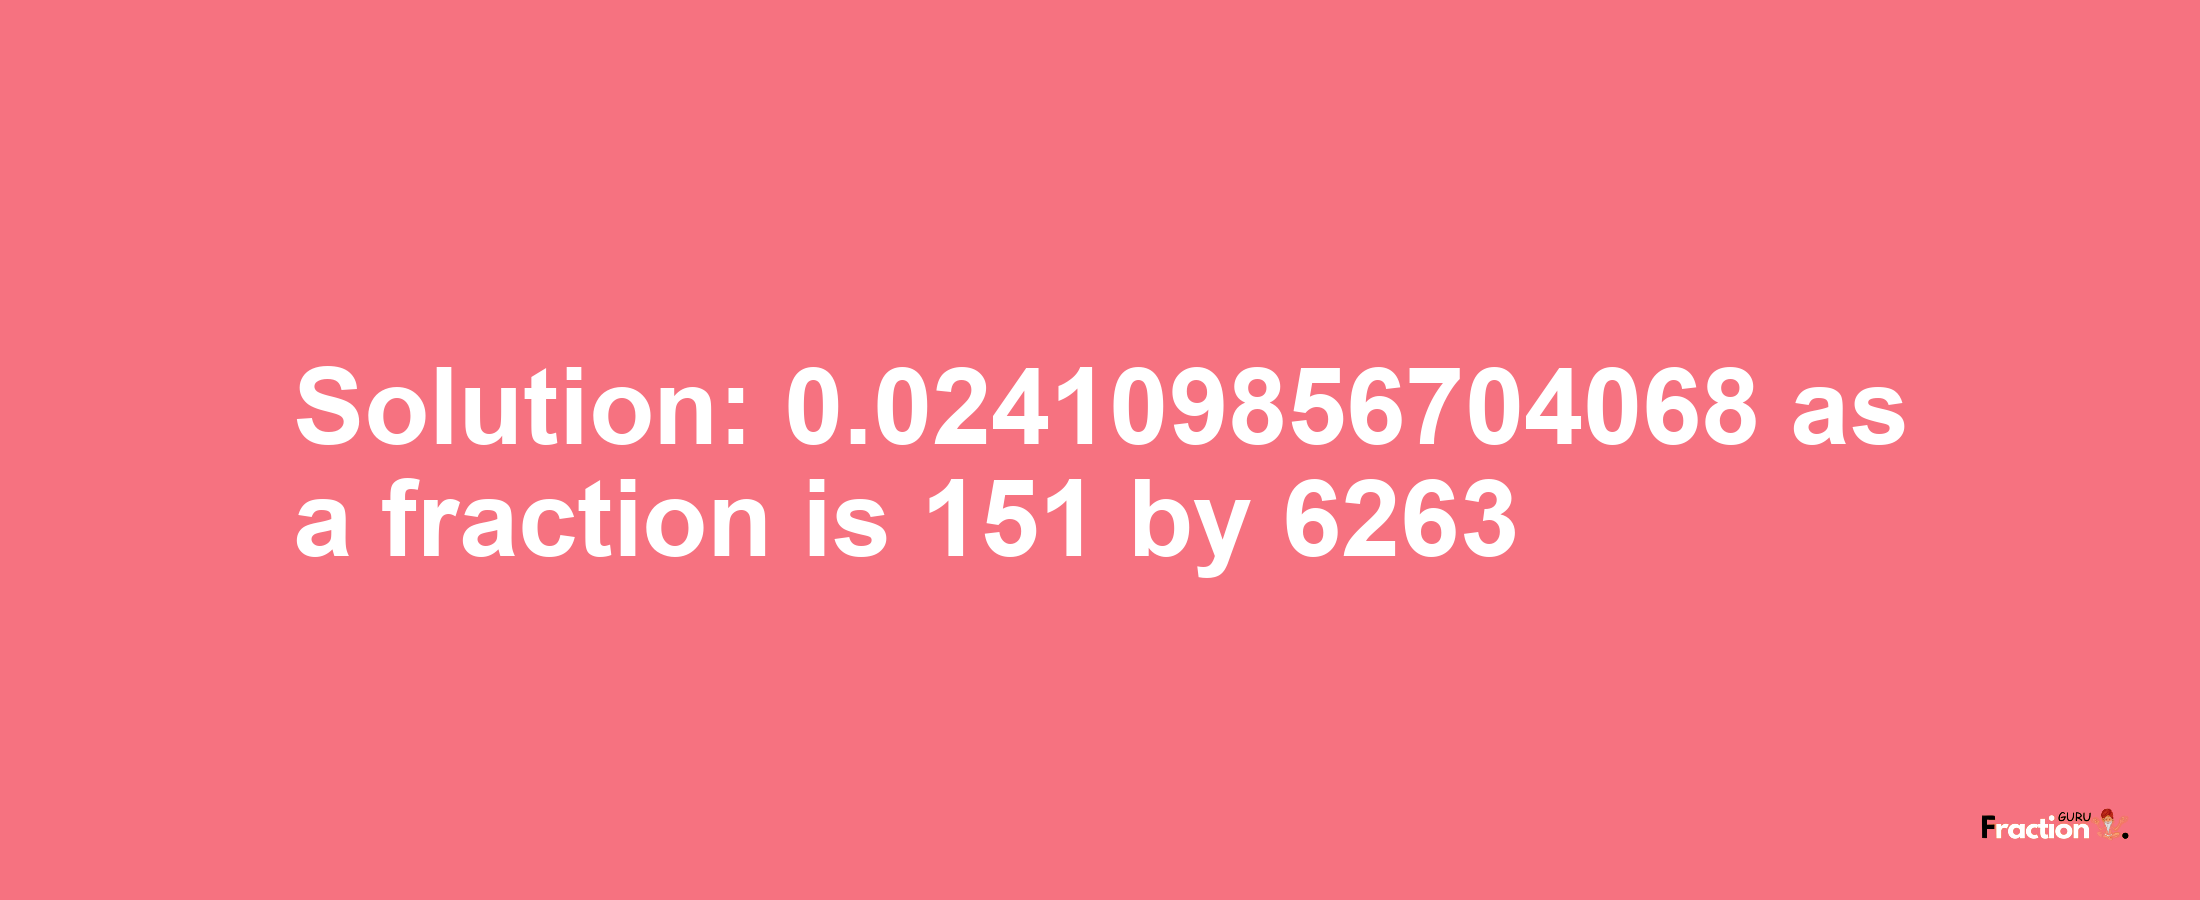 Solution:0.024109856704068 as a fraction is 151/6263